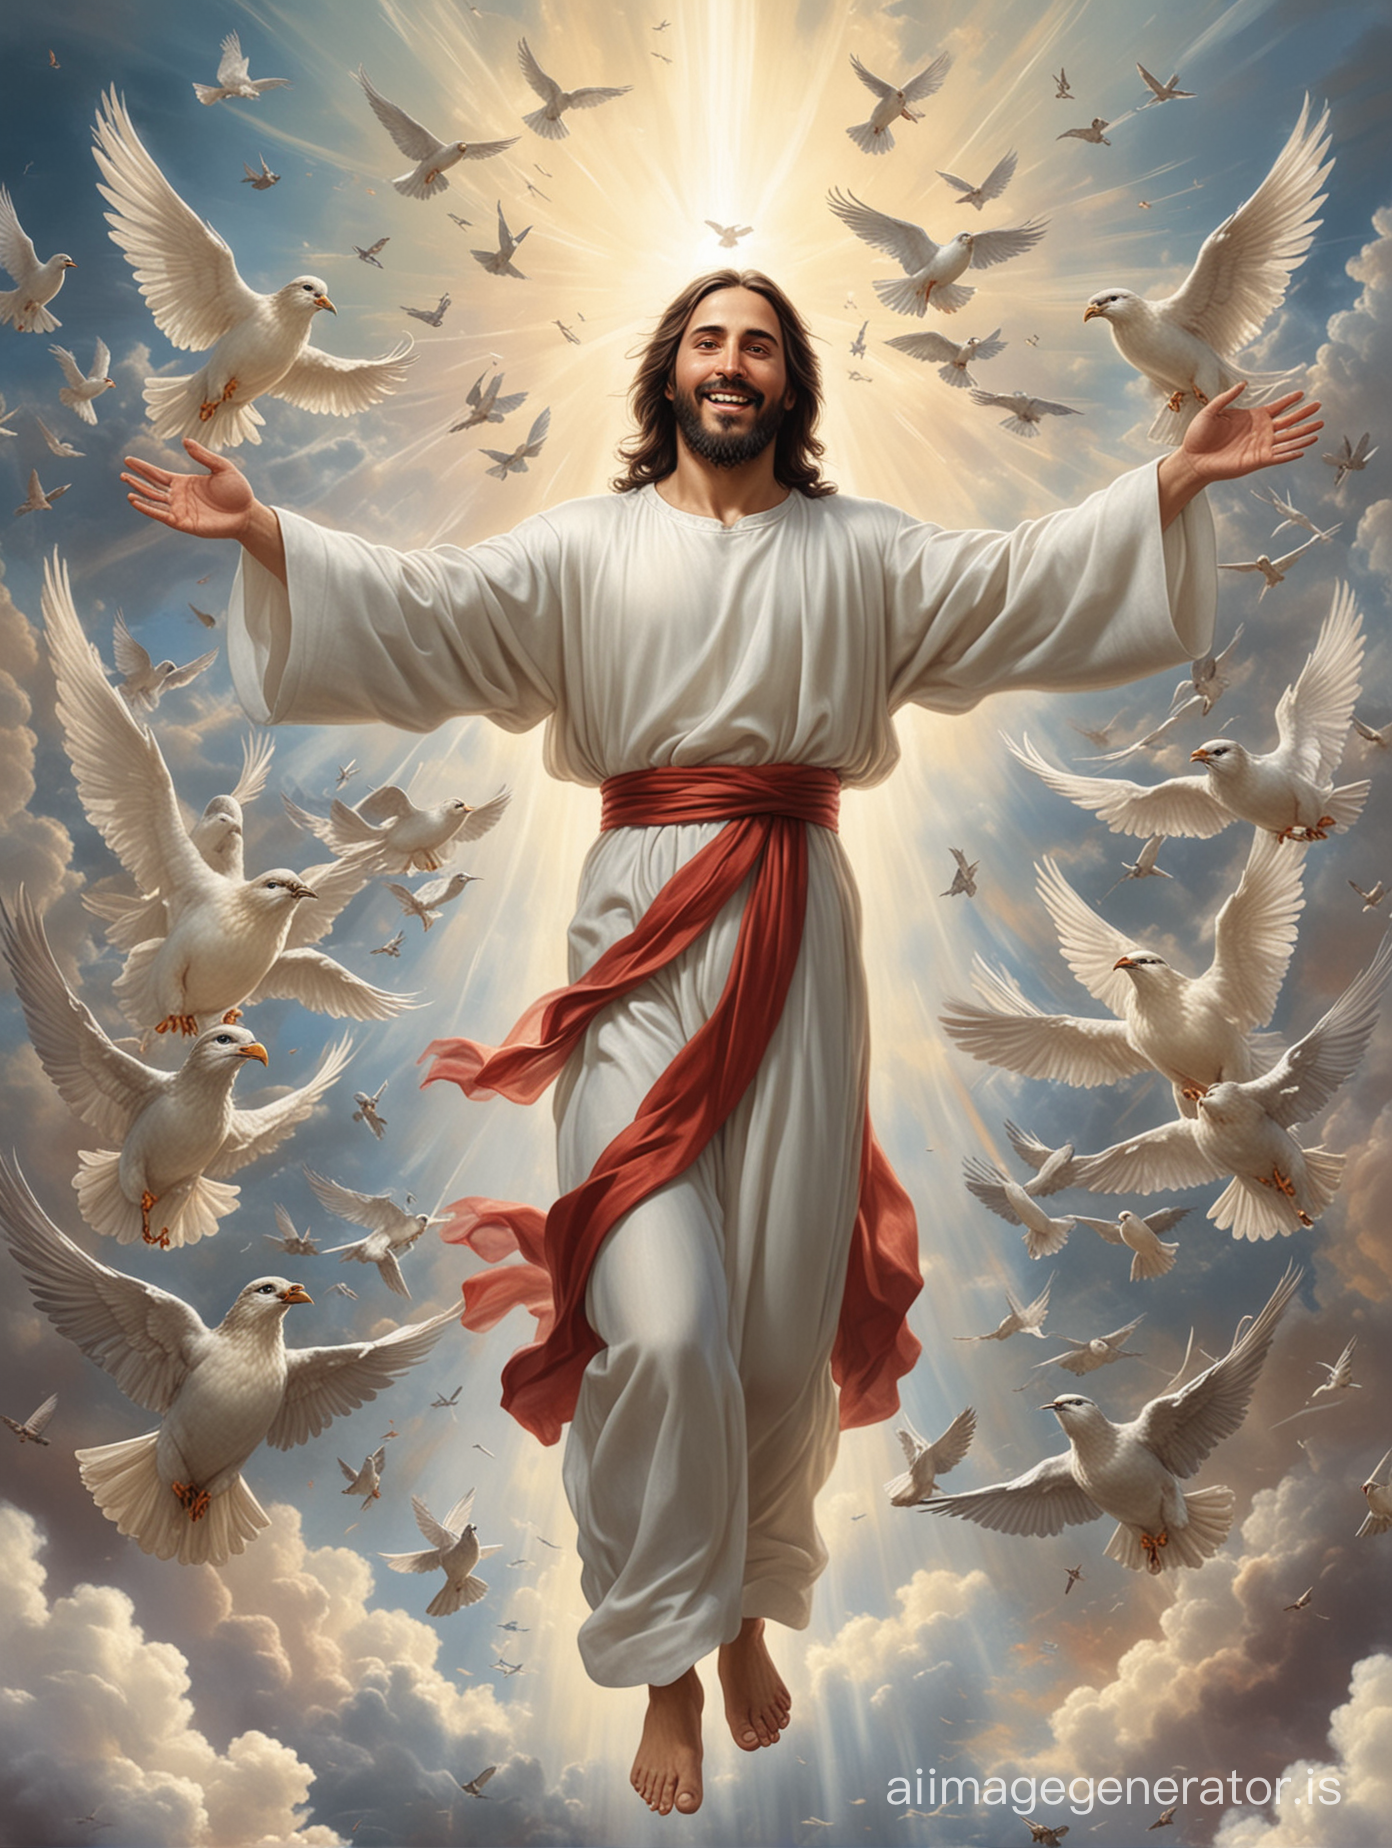 realistic picture of jesus divine mercy facing forward, smile, full body, spread his arms in clouds with birds,angels with music instruments.
